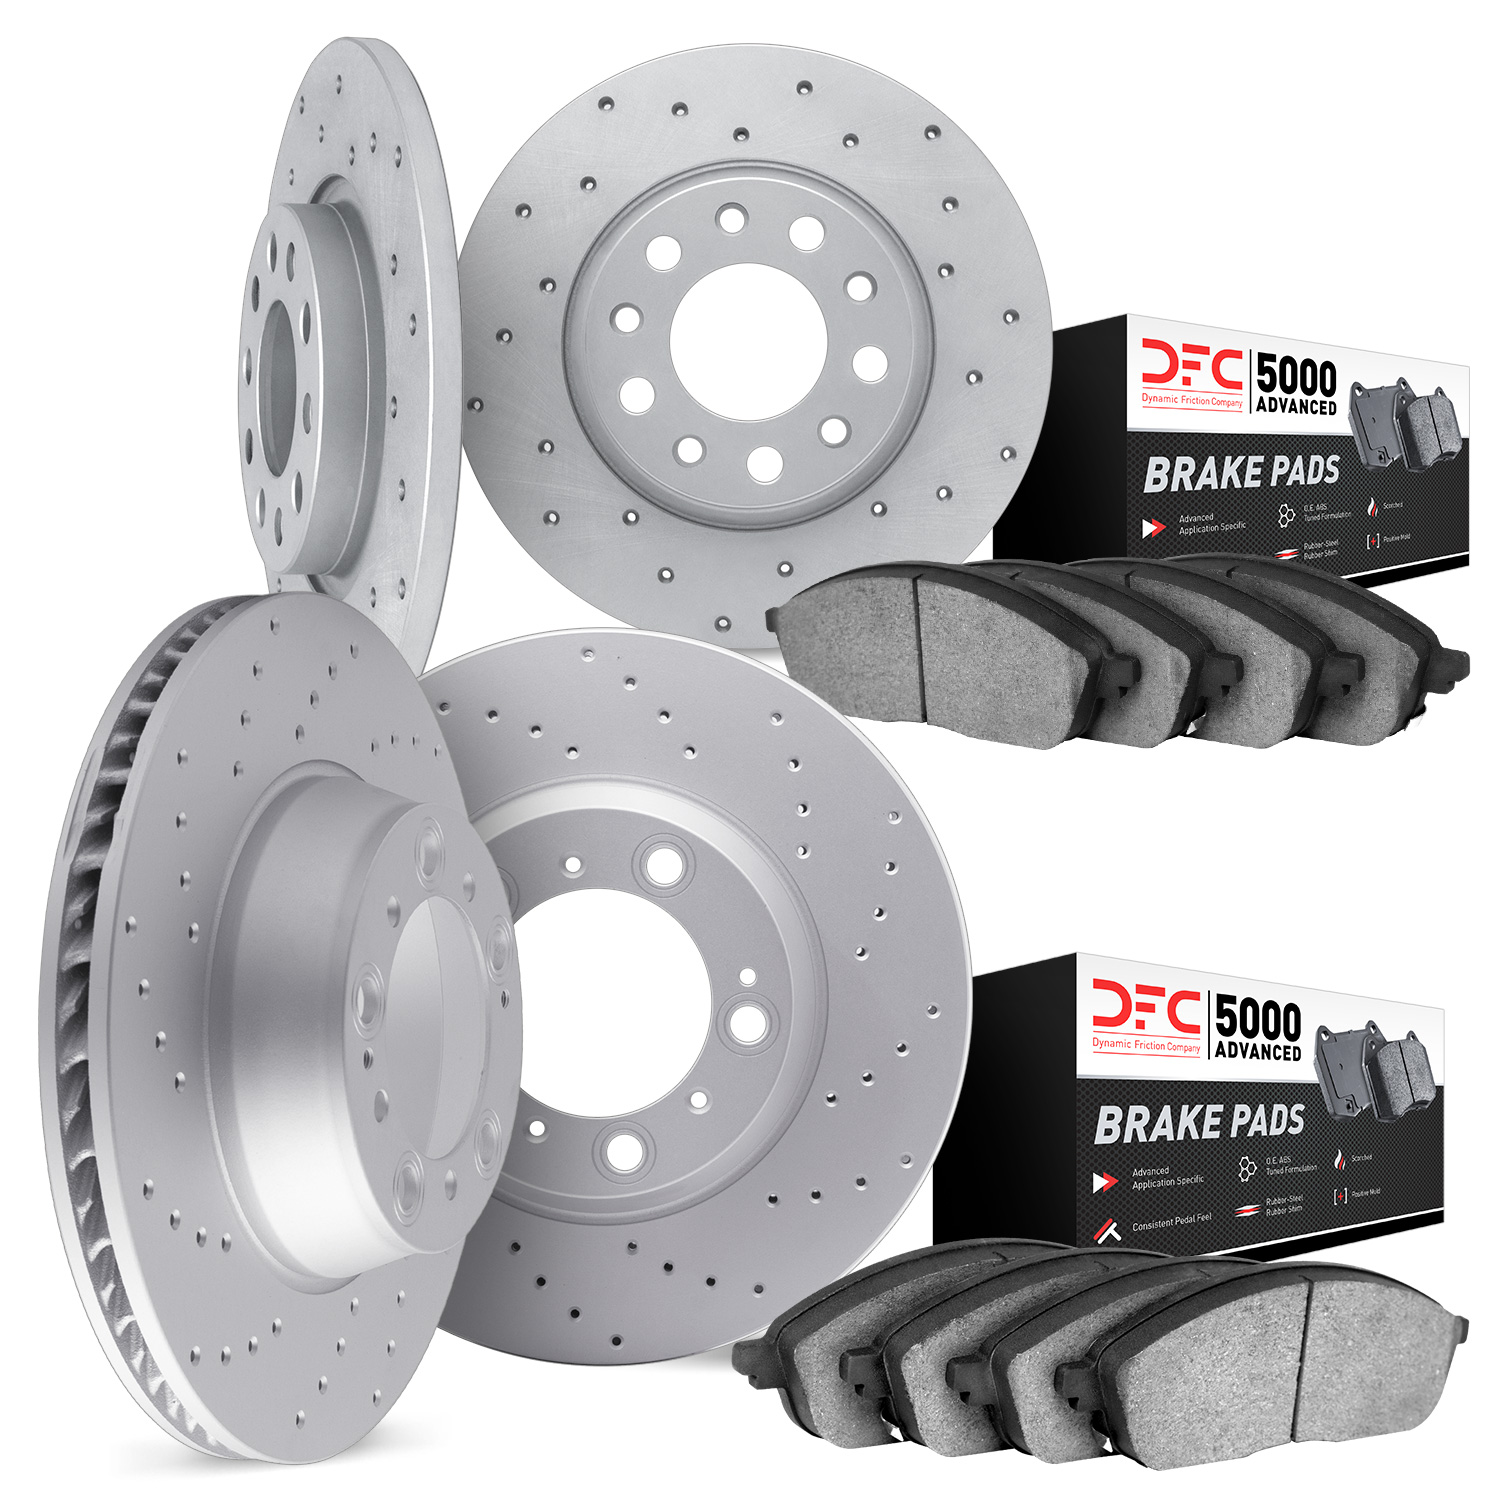 2704-13024 Geoperformance Drilled Brake Rotors with Active Performance Pads Kit, 2012-2016 Subaru, Position: Front and Rear